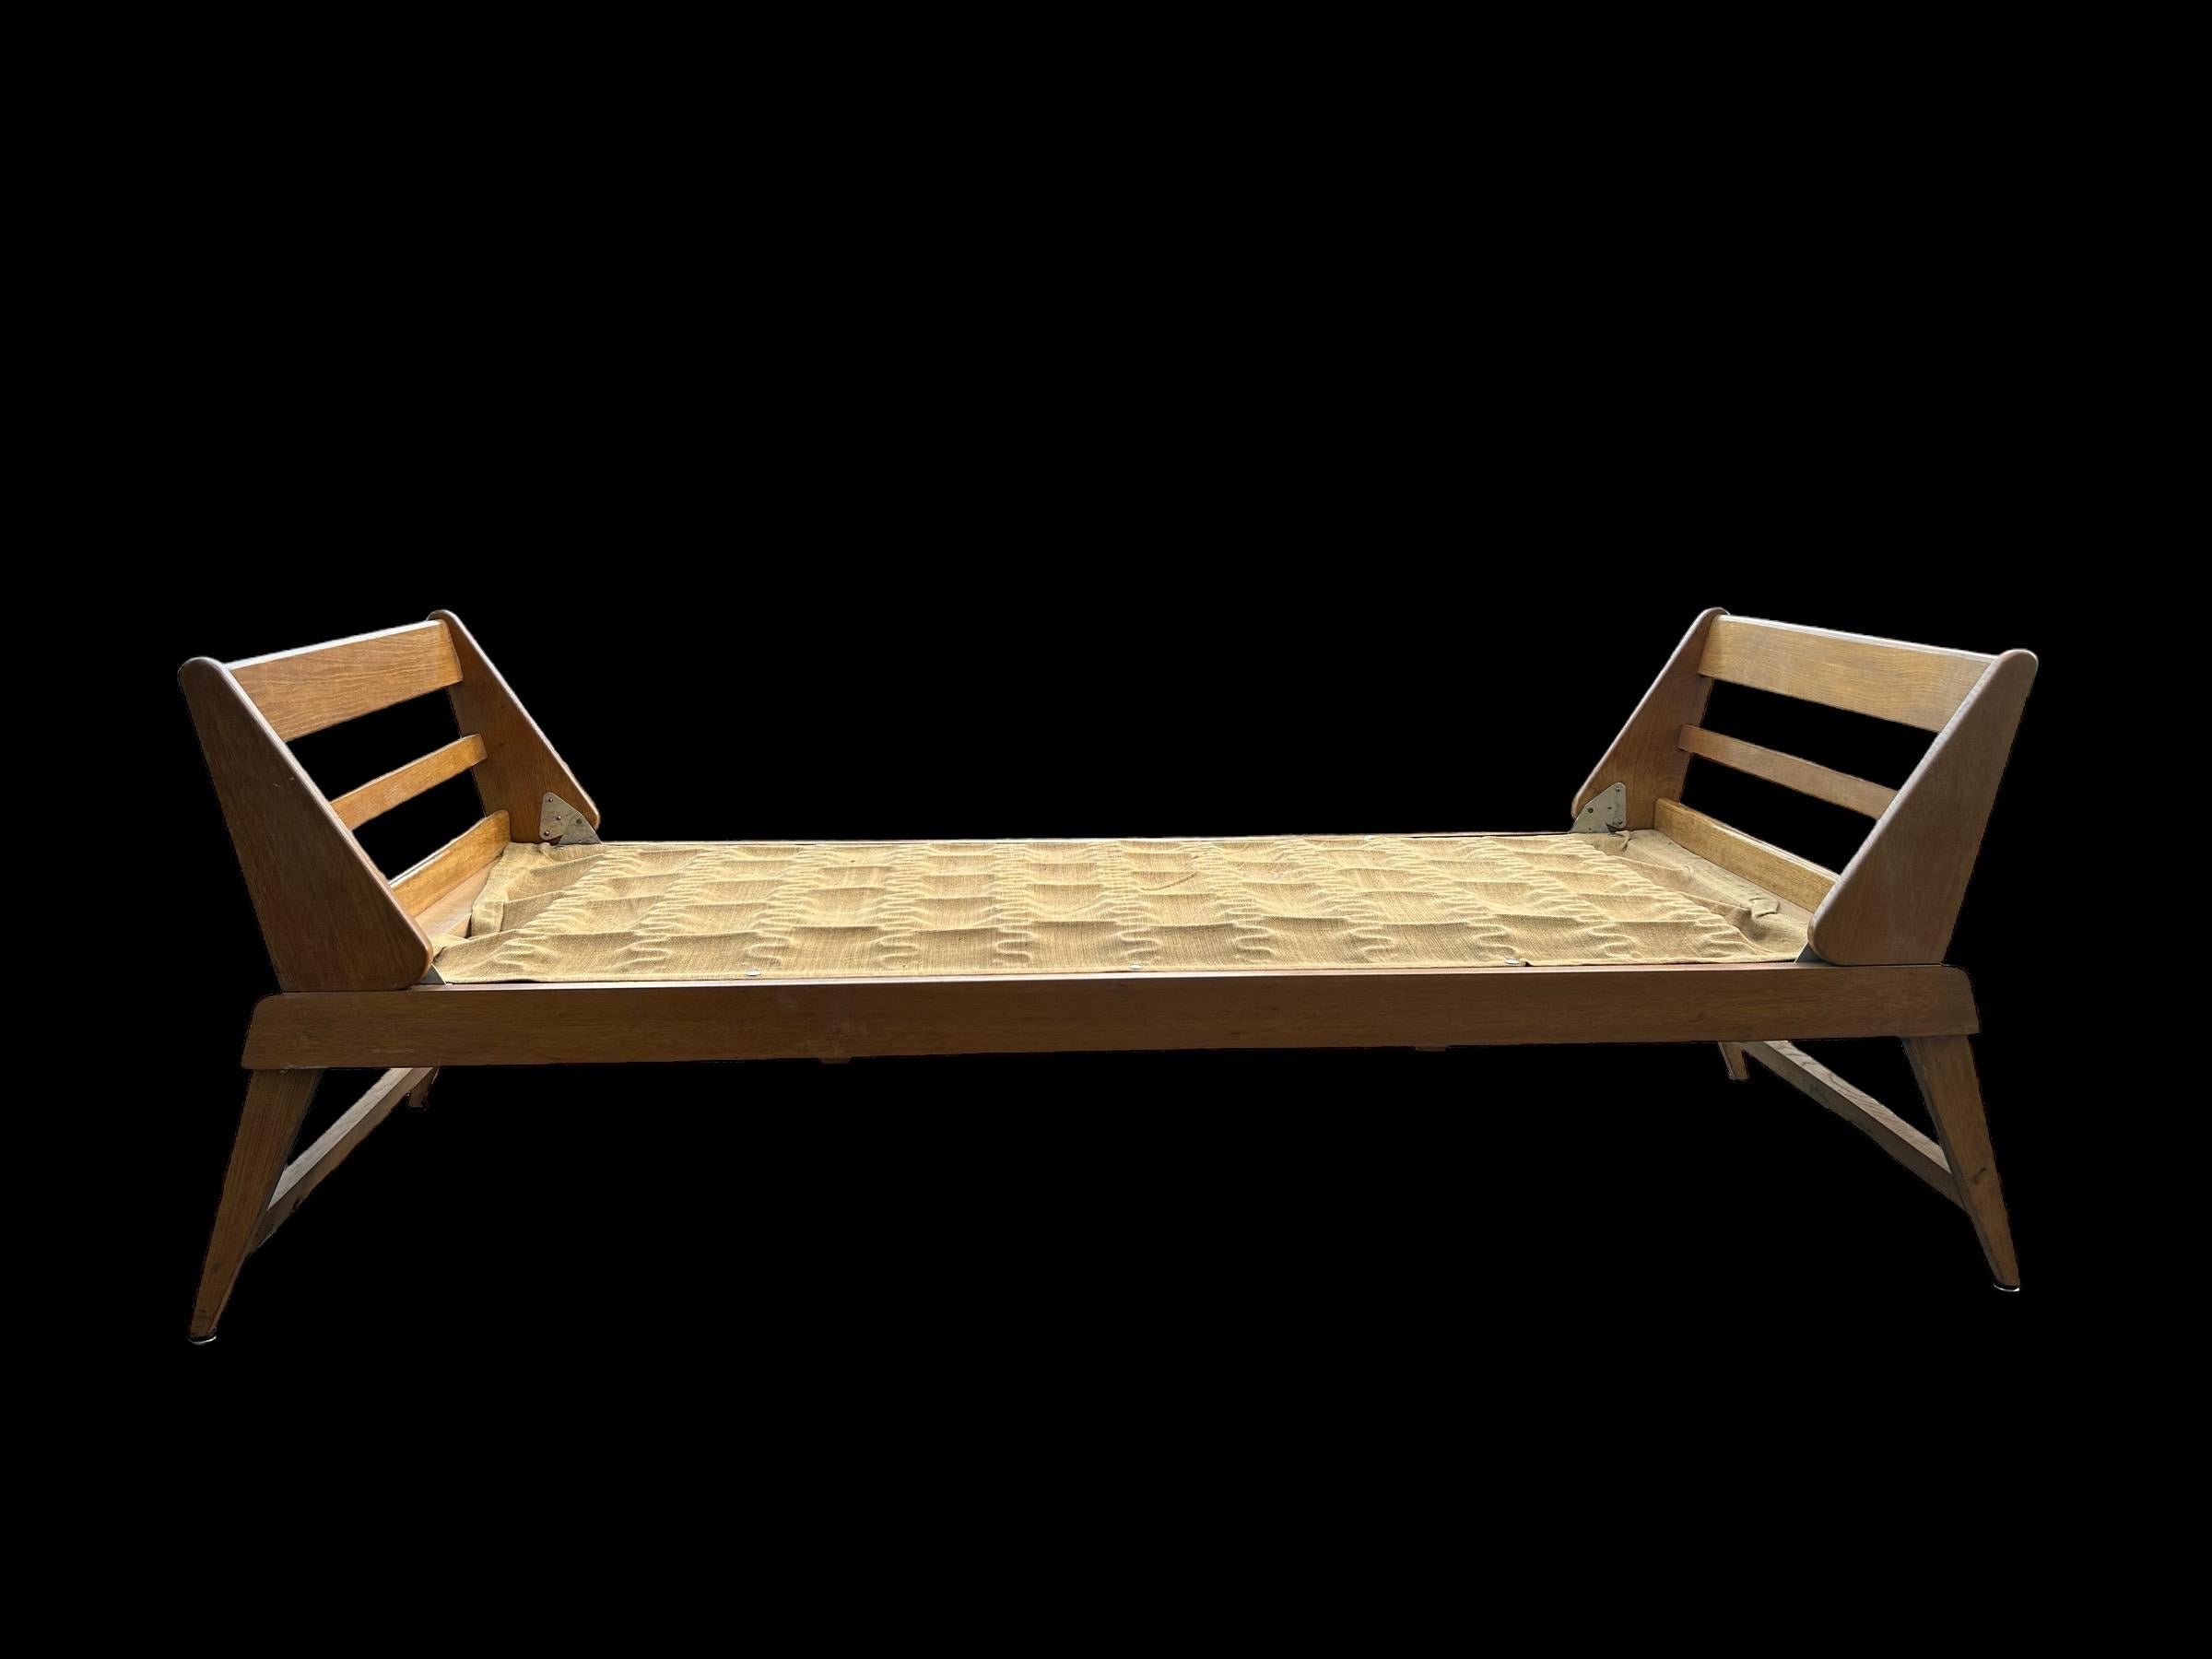 French oak daybed from the 1950's designed by René jean Caillette in original condition.
Modernist design from the master of the furniture of the post war furniture in France. 
Folding armrests and feet as pictured. 
